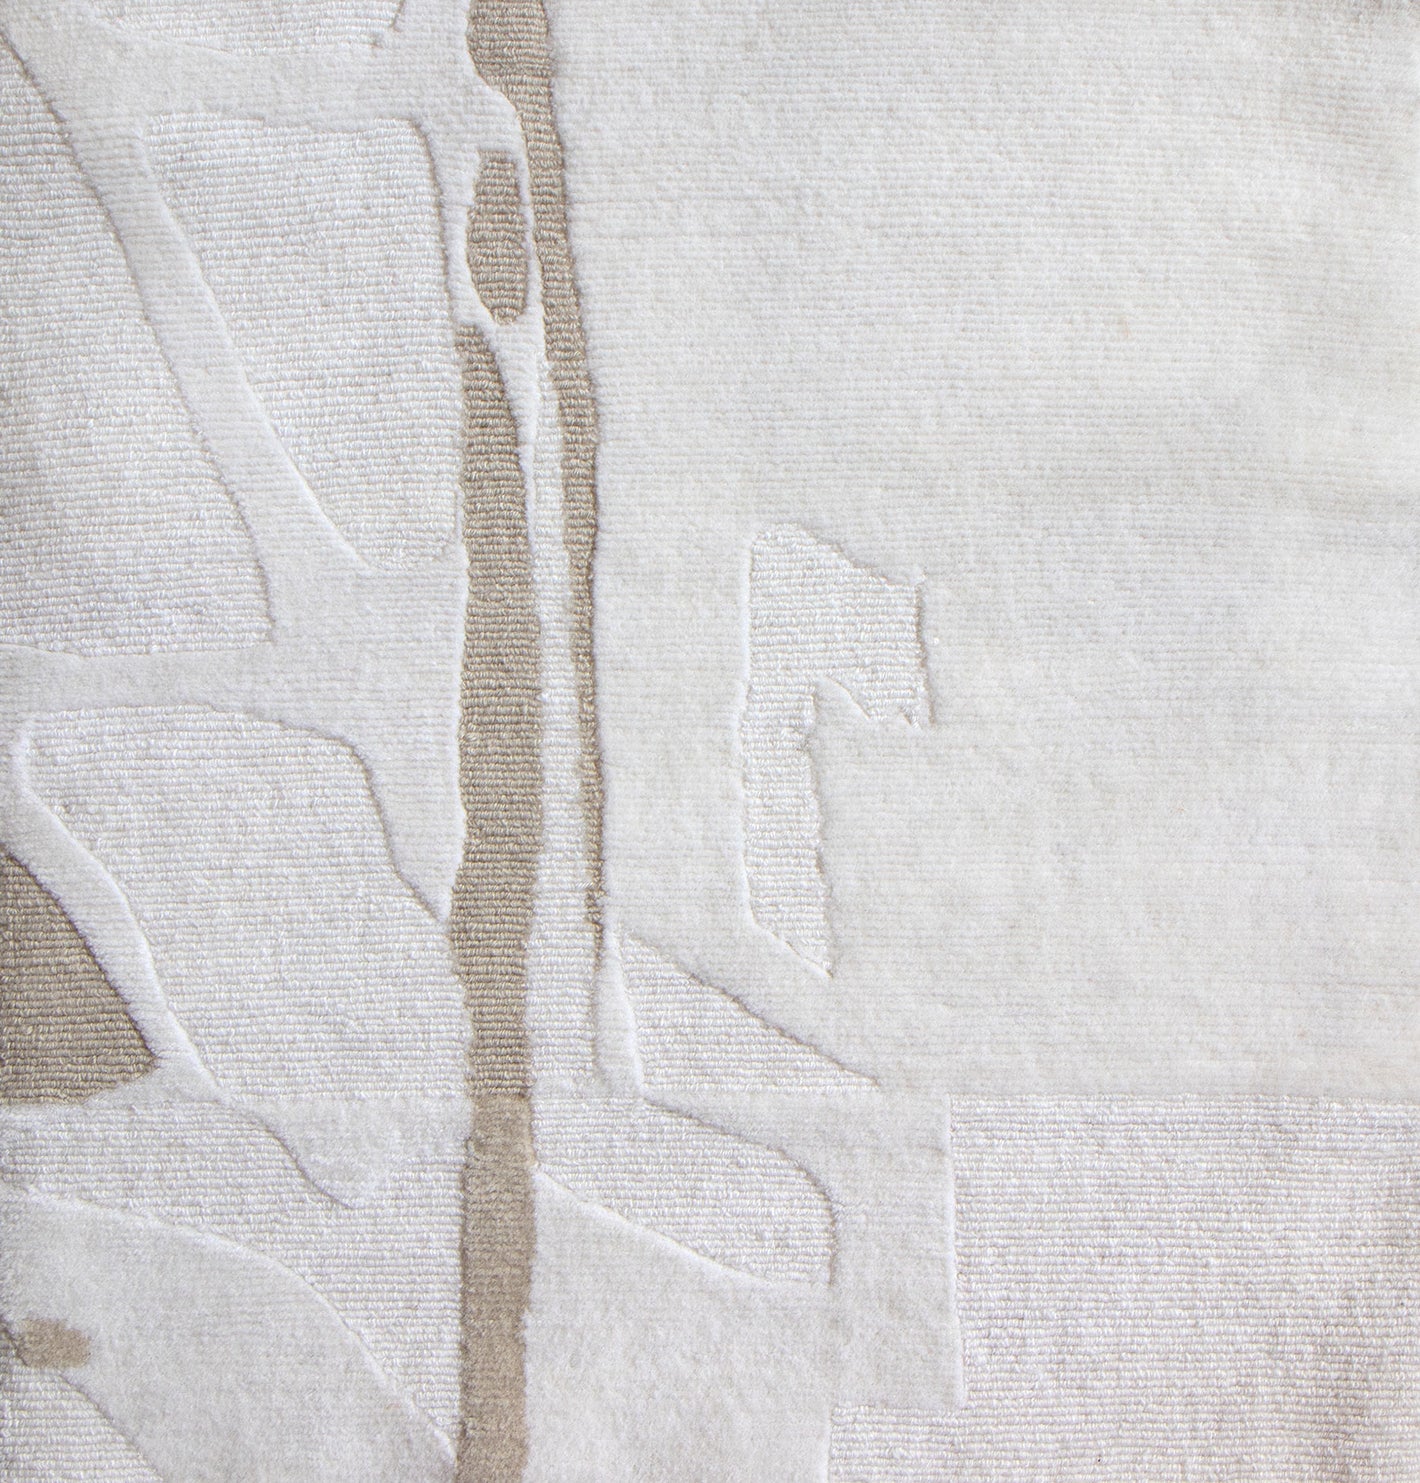 A white piece of cloth with a pattern on it